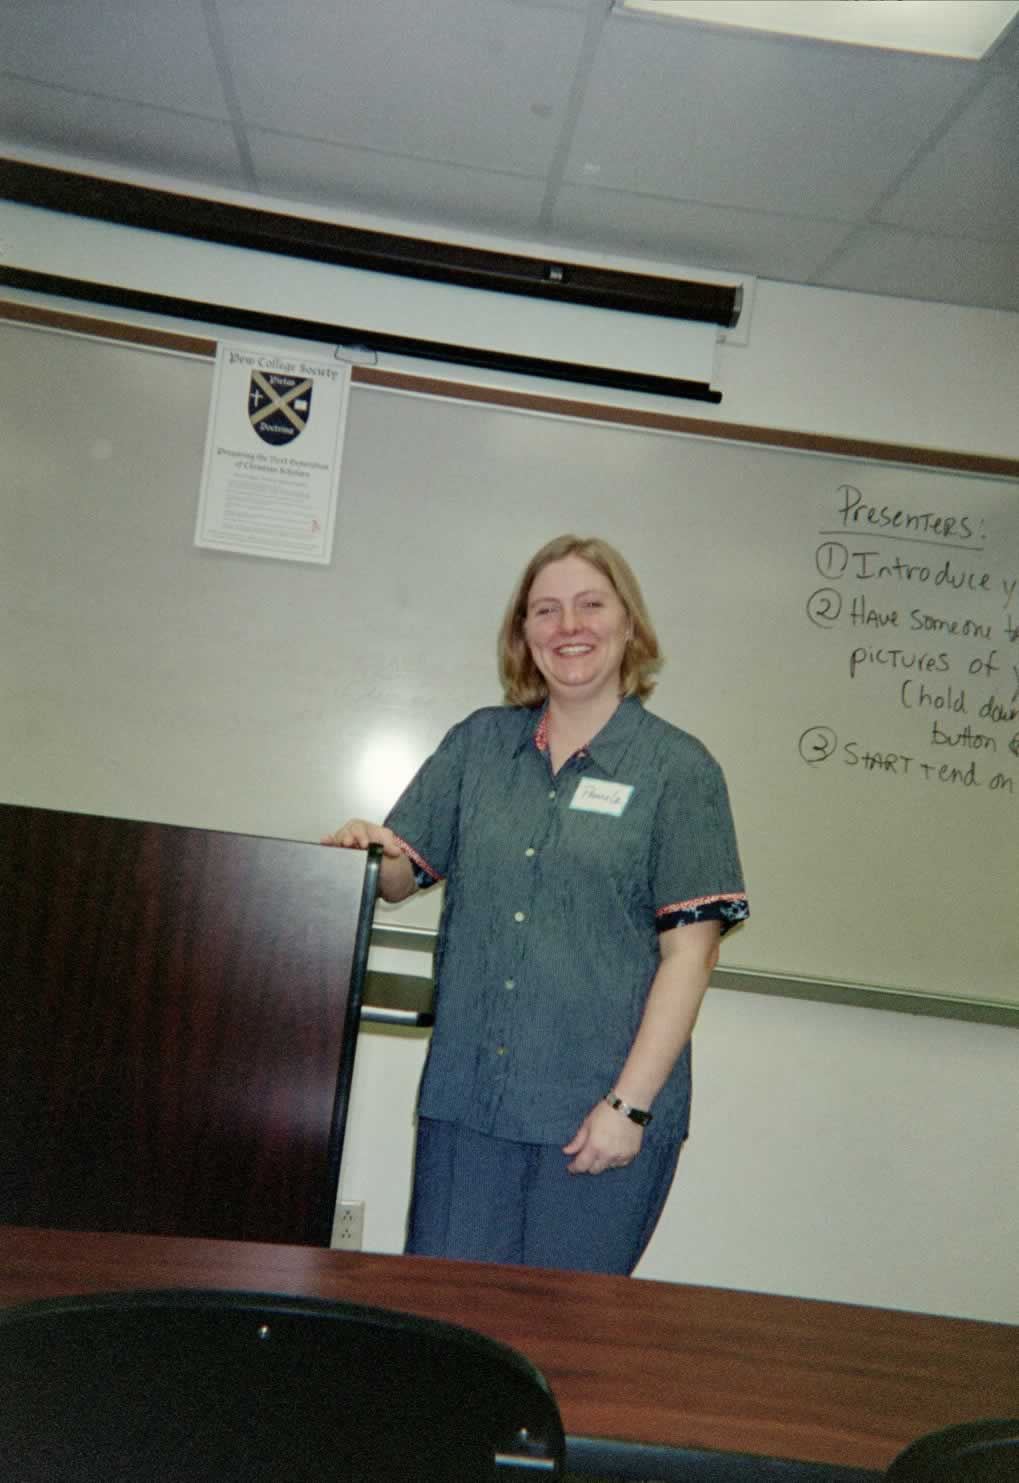 picture of a woman smiling next to a podium in a classroom